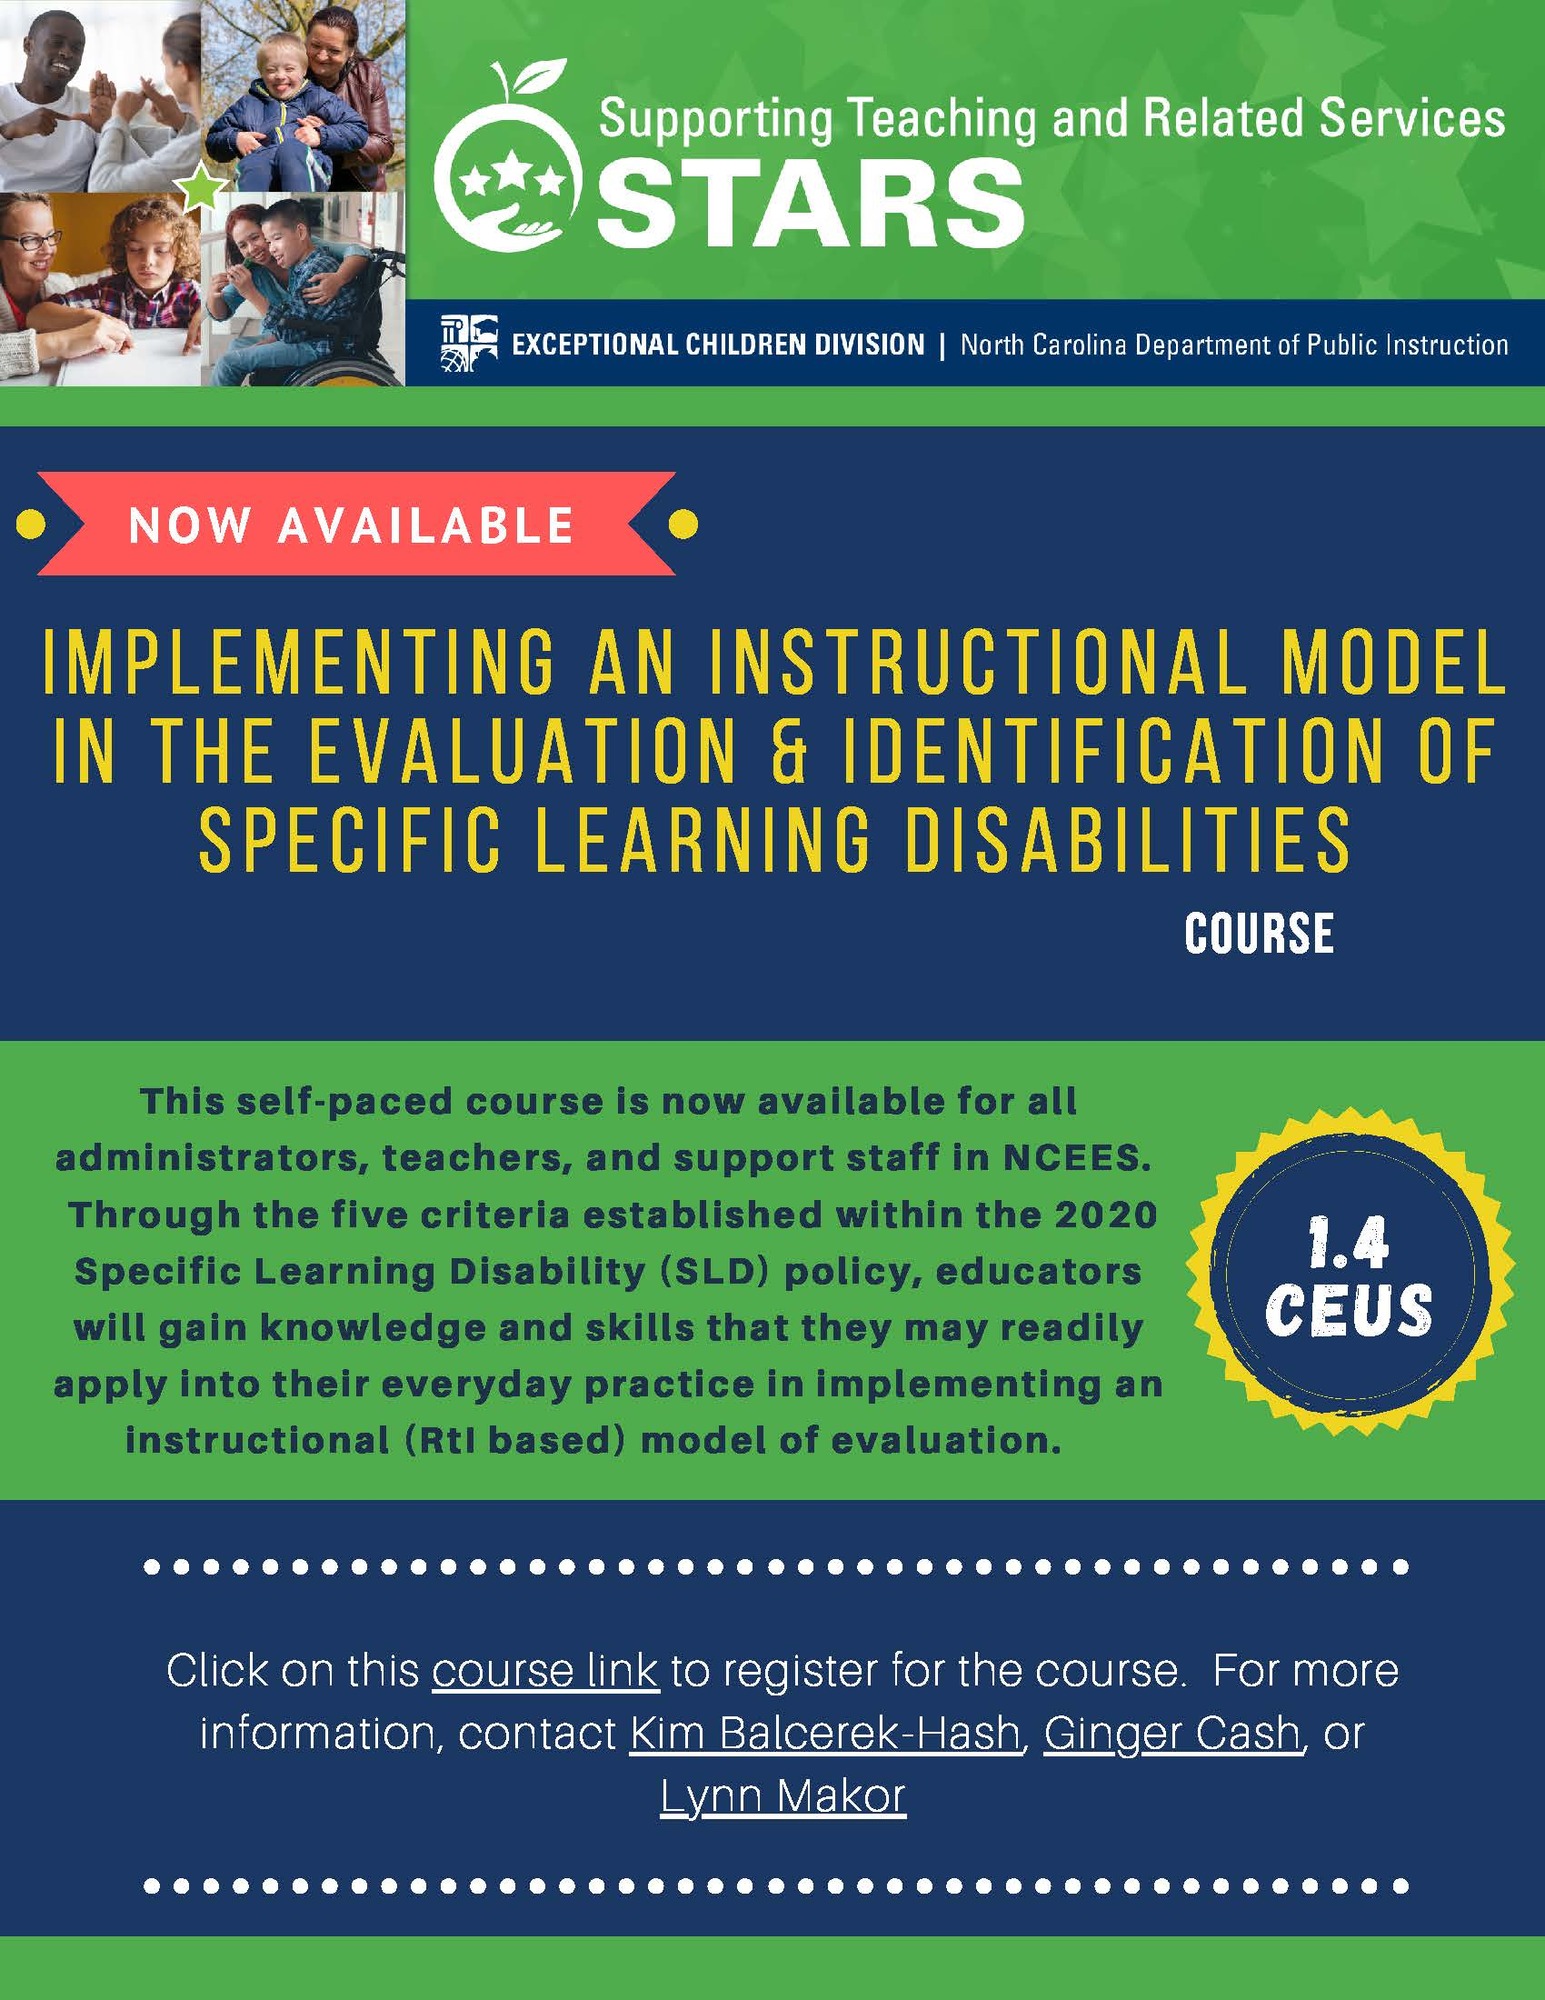 Implementing an Instructional Model in the Evaluation & Identification of Specific Learning Disabilities course, 1.4 CEUs